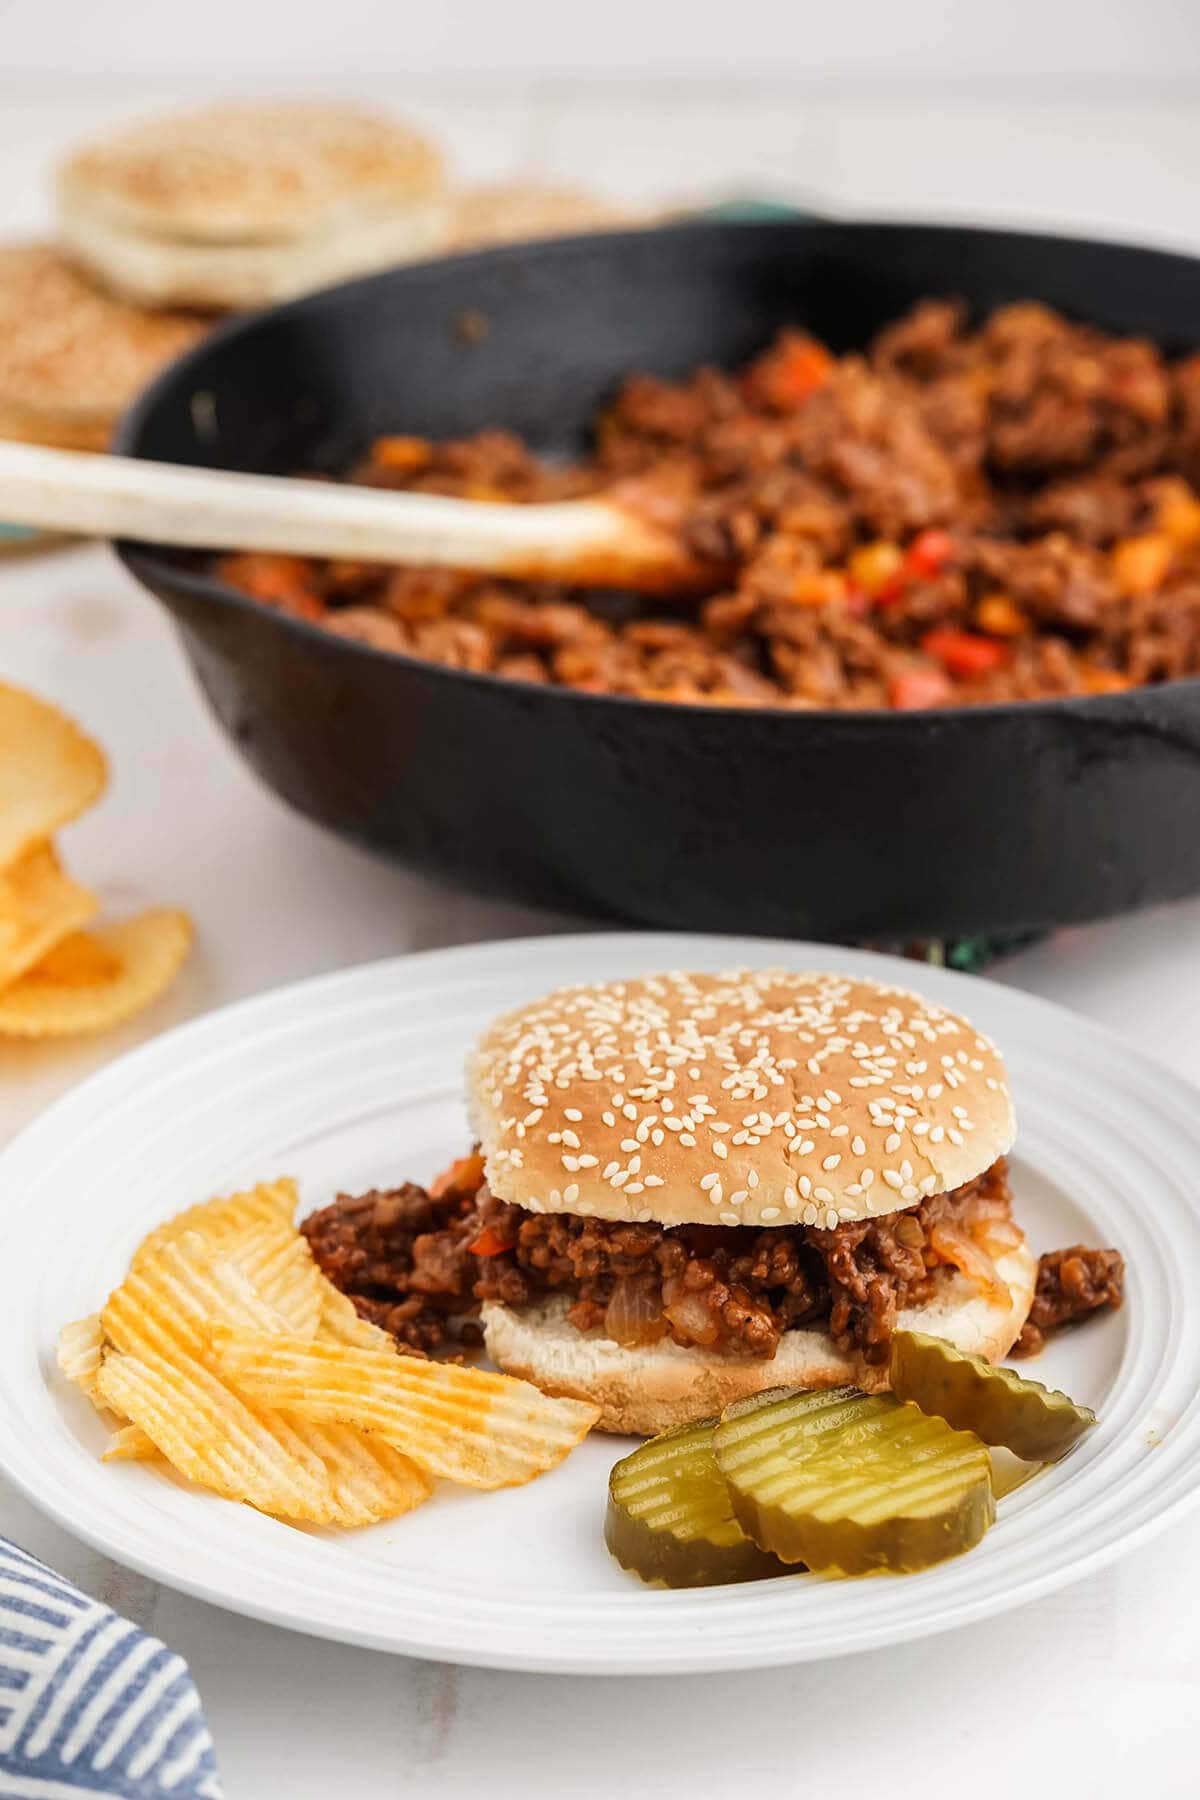 Bun filled with old fashioned sloppy Joes recipe on plate with pickles and potato chips. With skillet in background.